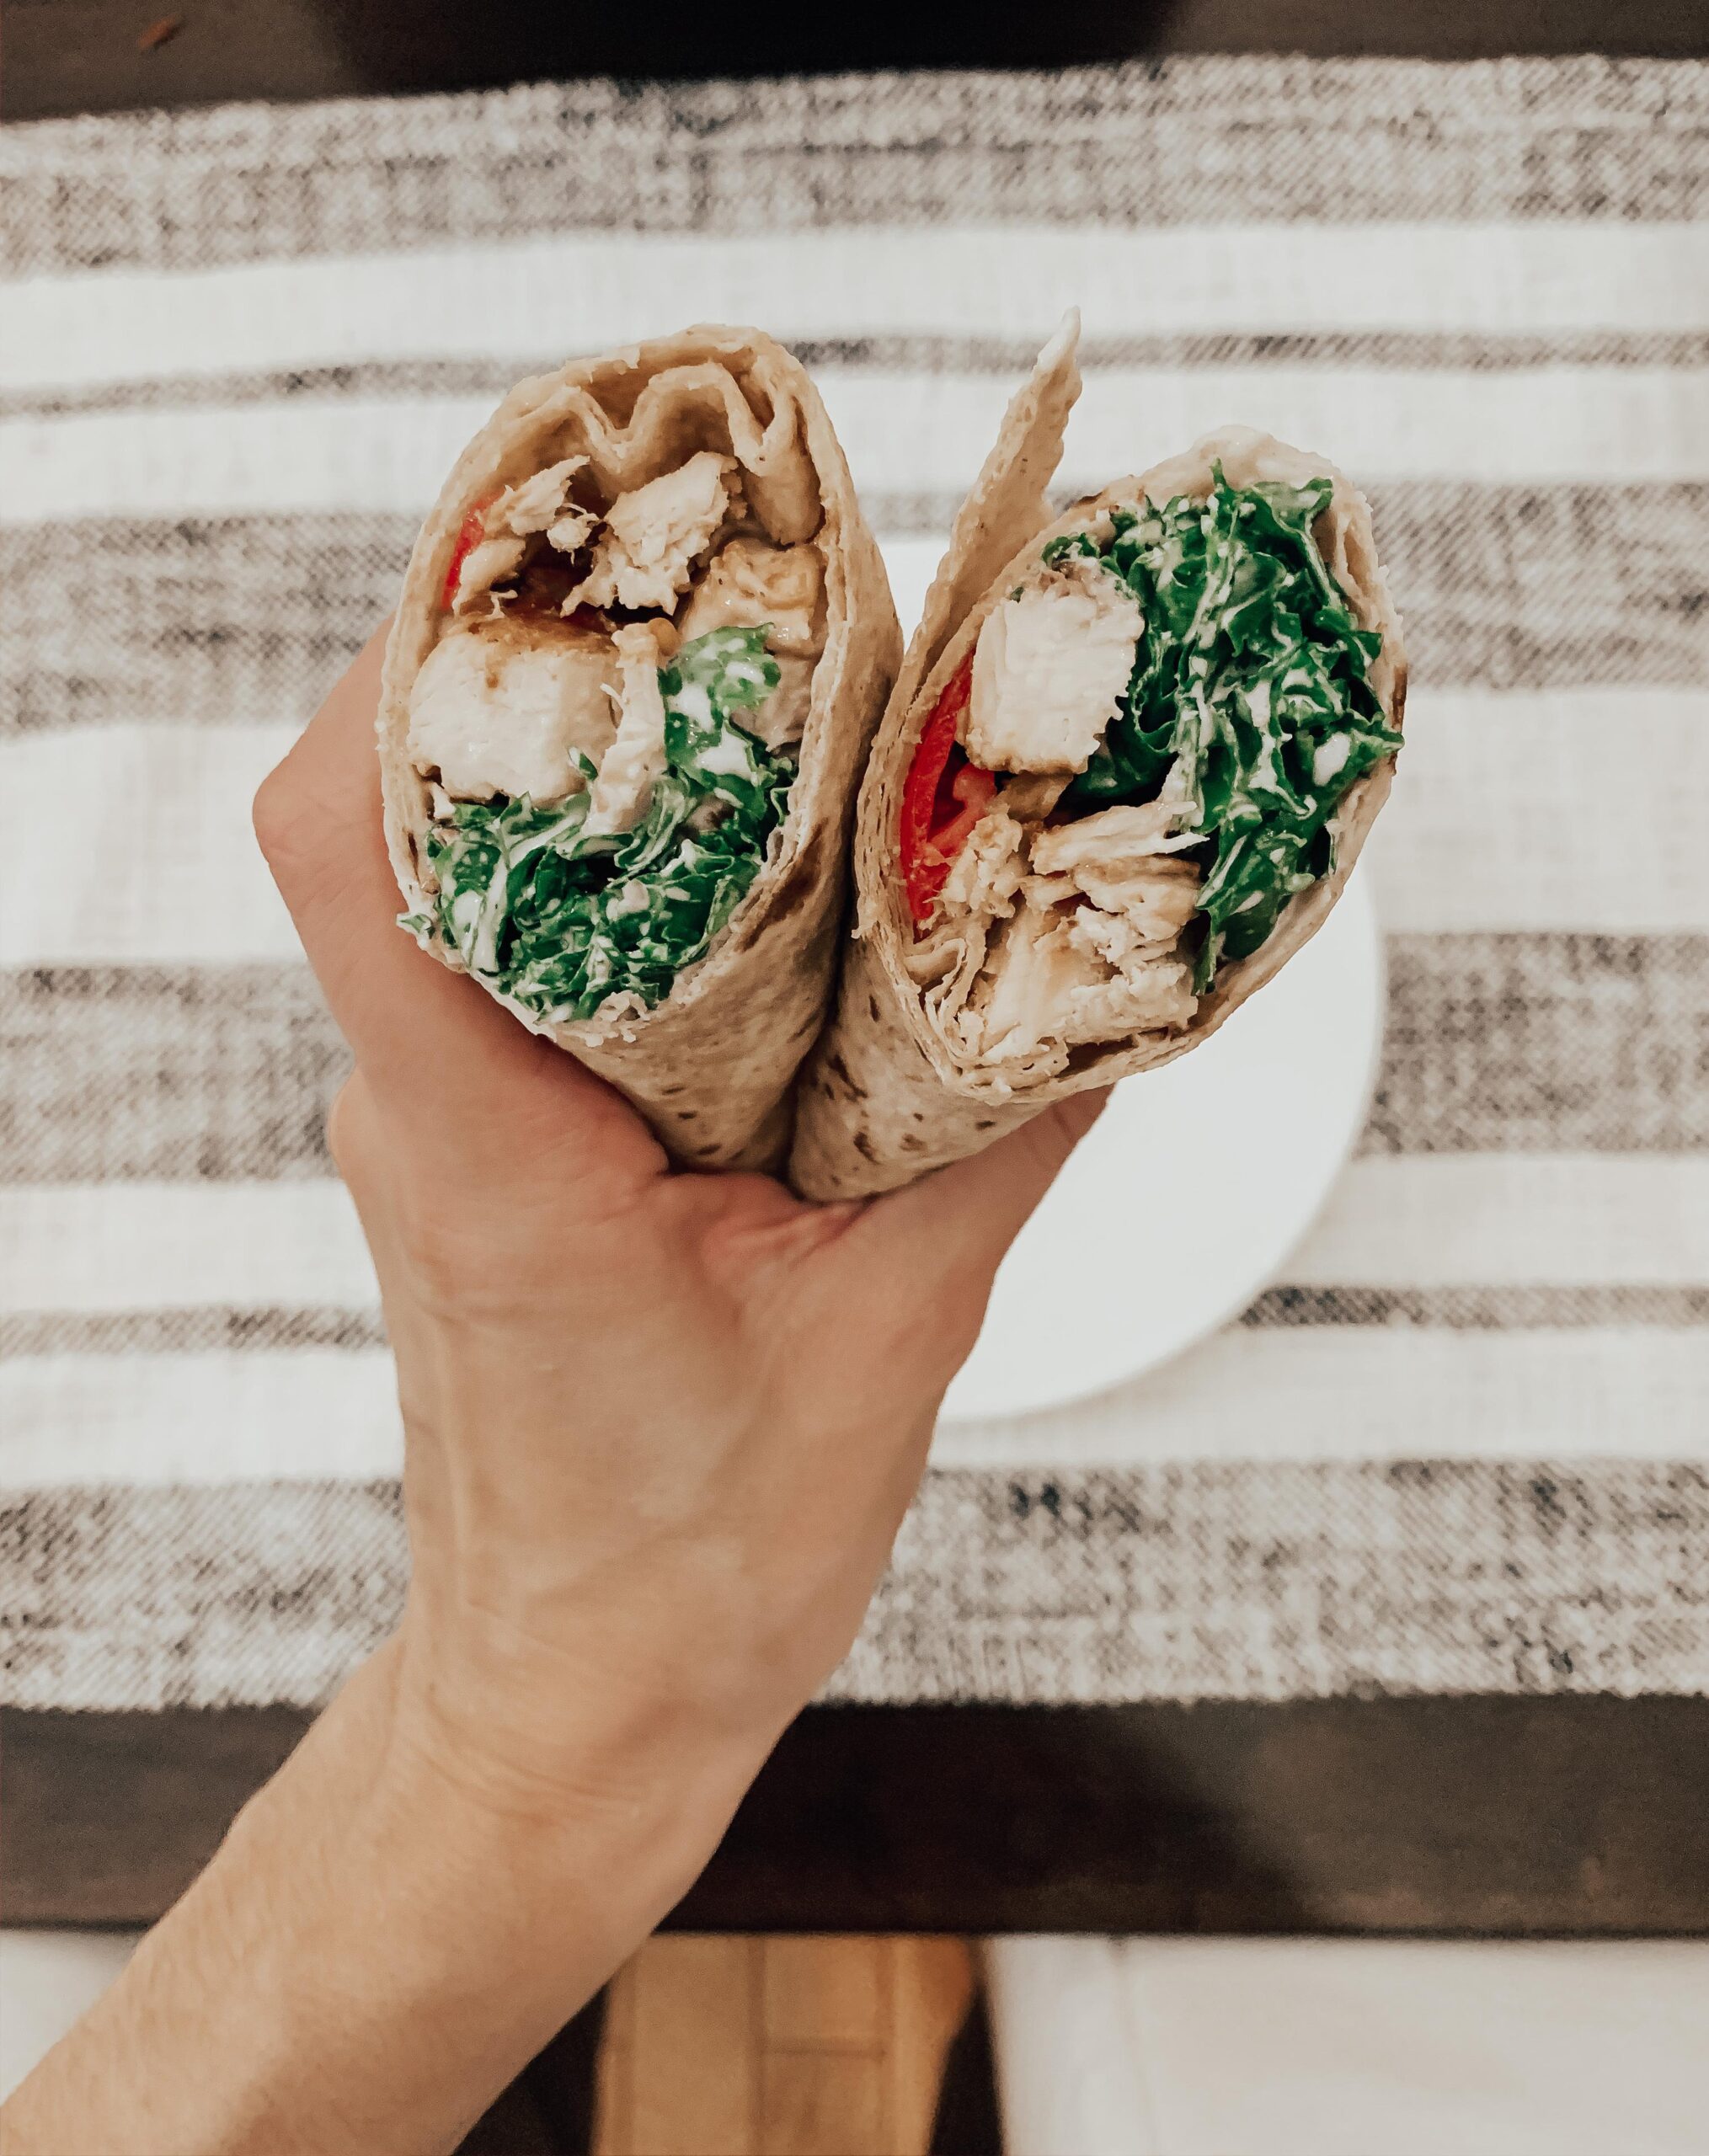  Love wraps? Here's a gluten-free version packed with healthy greens and